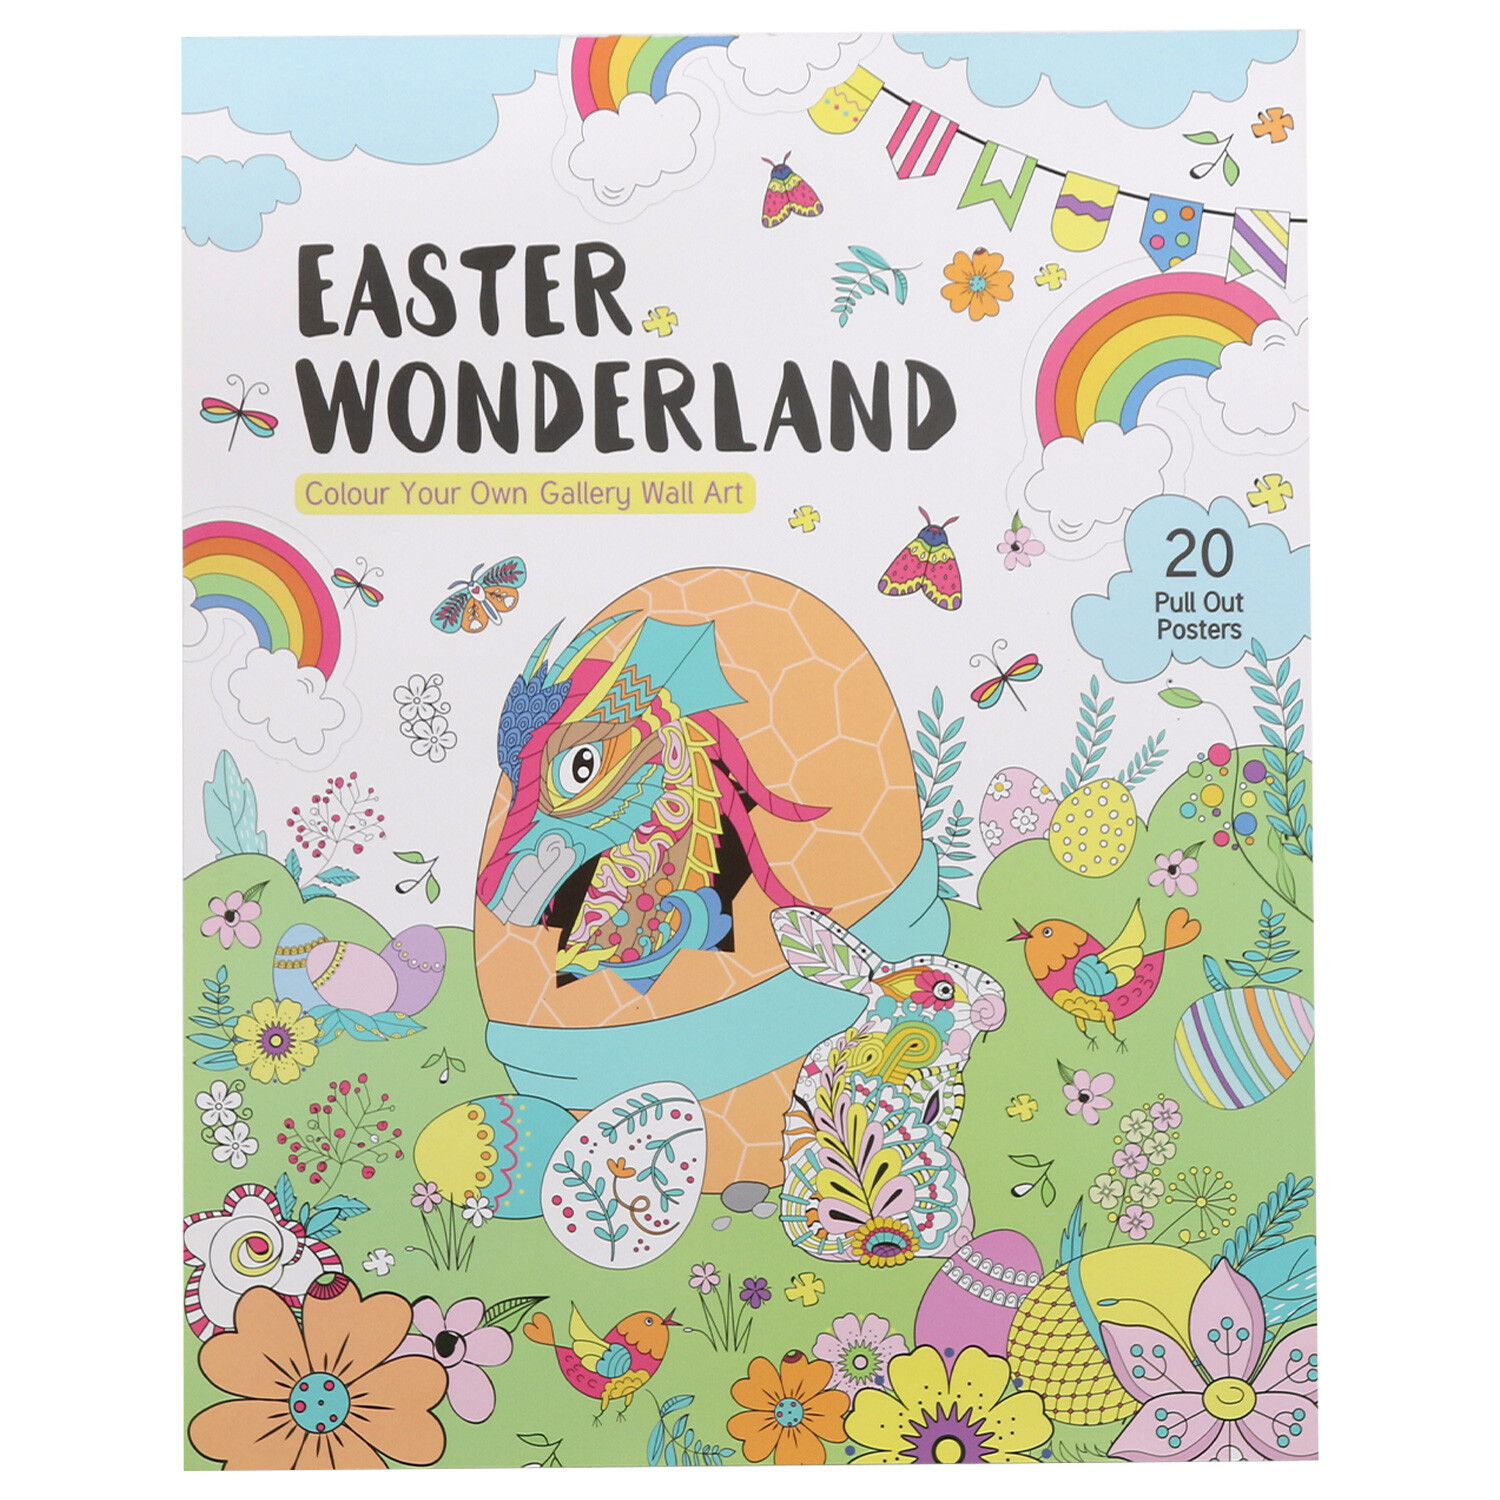 Easter Wonderland Colour Your Own Wall Art Book Image